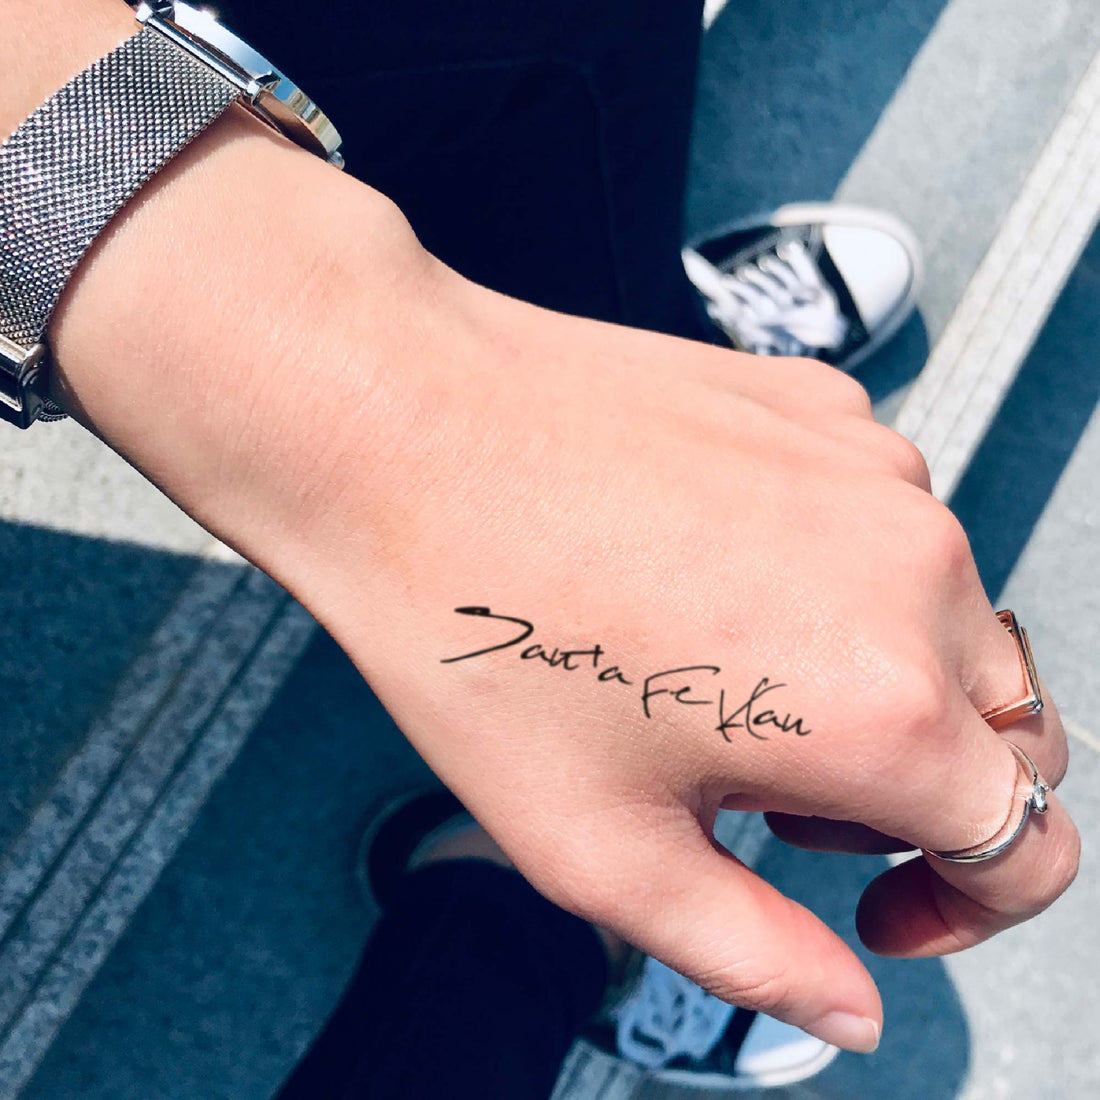 Santa Fe Klan custom temporary tattoo sticker design idea inspiration meanings removal arm wrist hand words font name signature calligraphy lyrics tour concert outfits merch accessory gift souvenir costumes wear dress up code